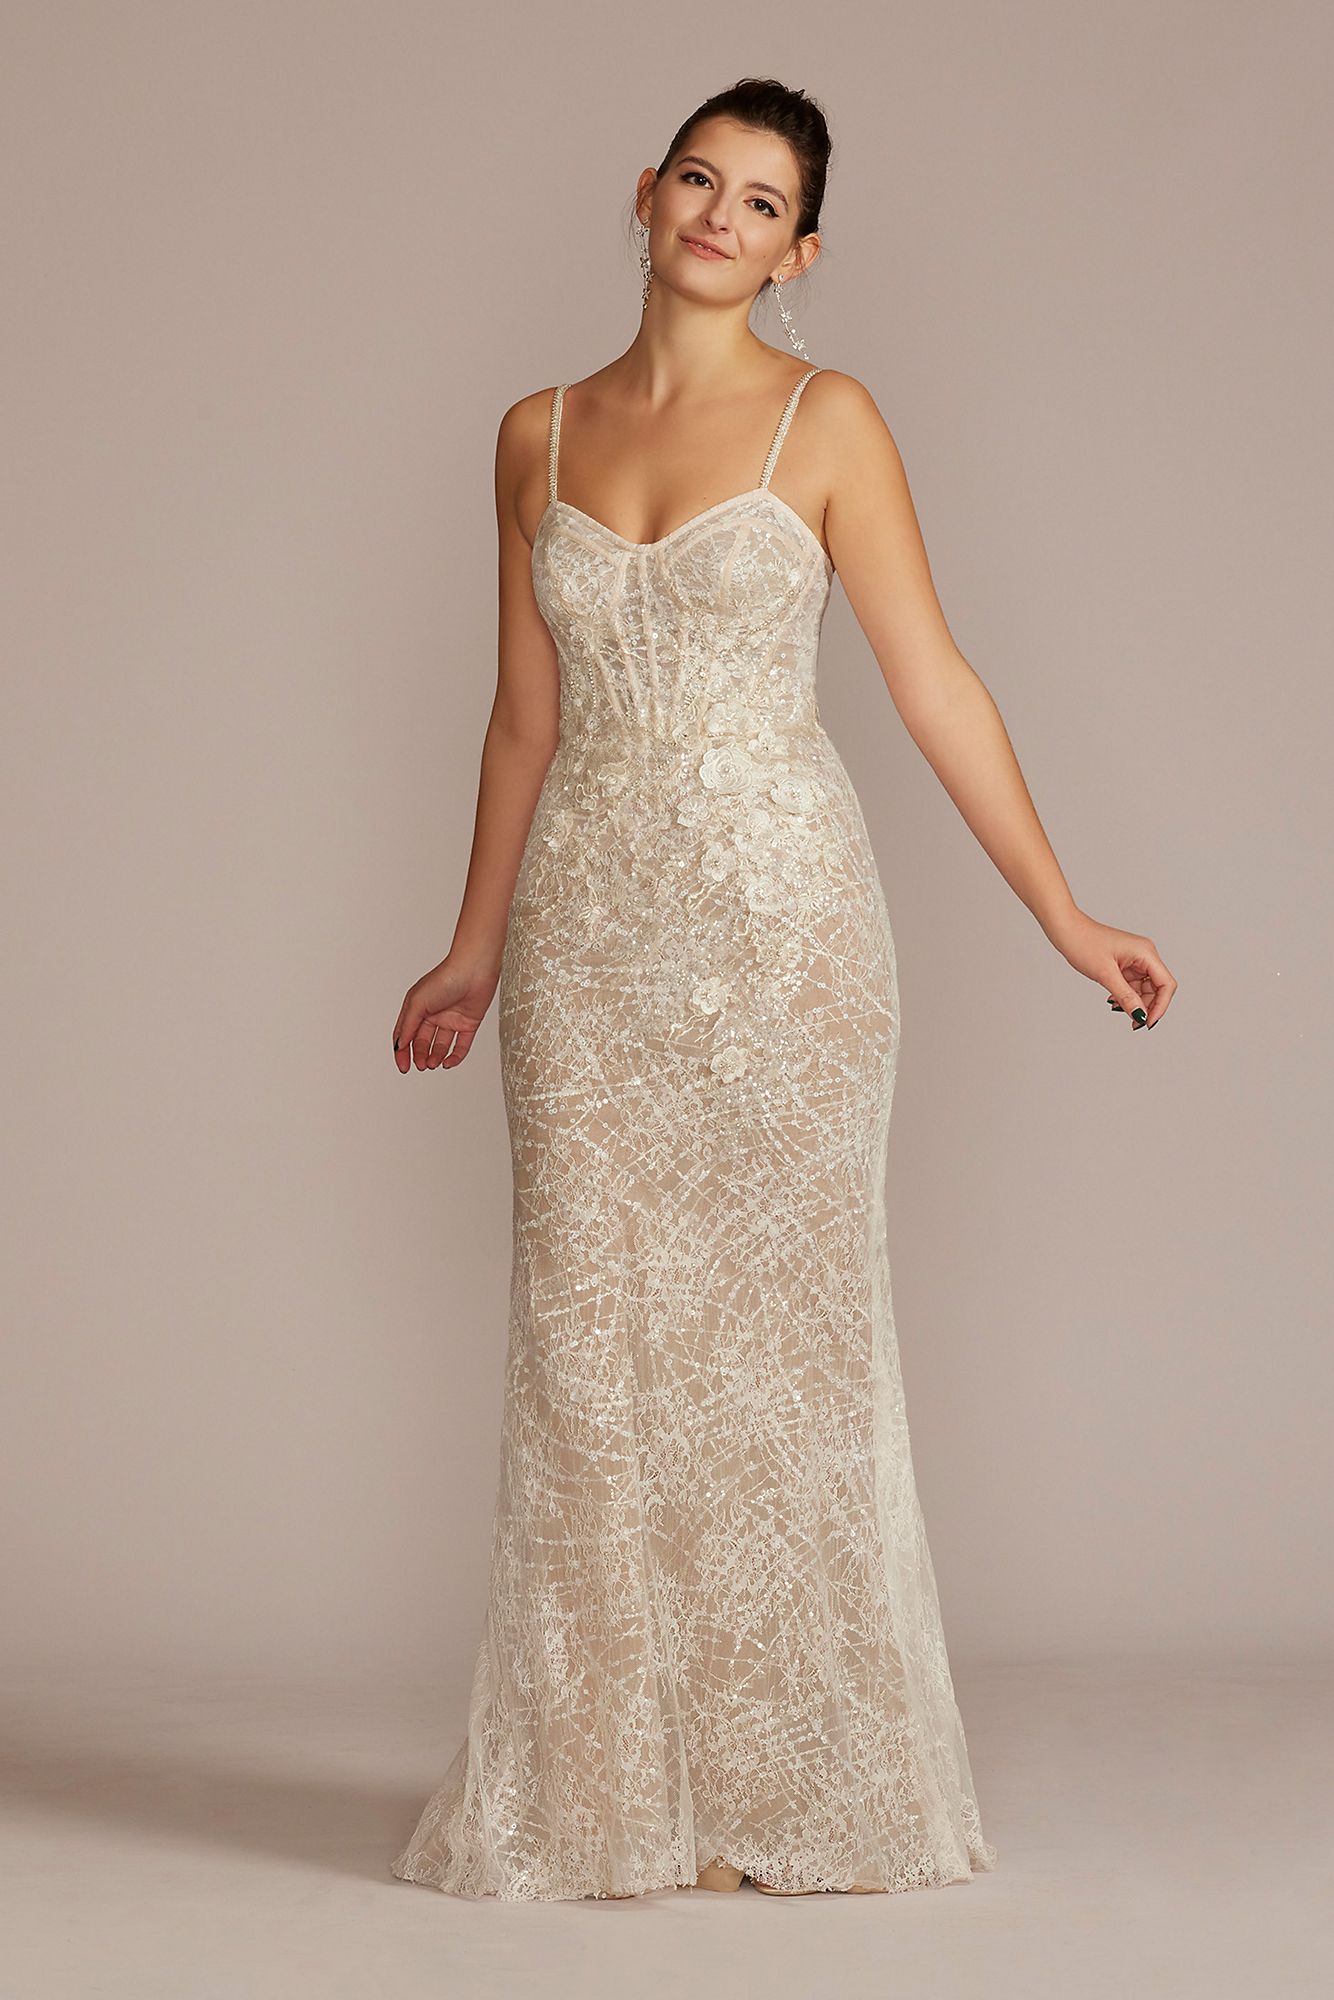 Lace Sheath Wedding Gown with Overskirt Galina Signature SWG916